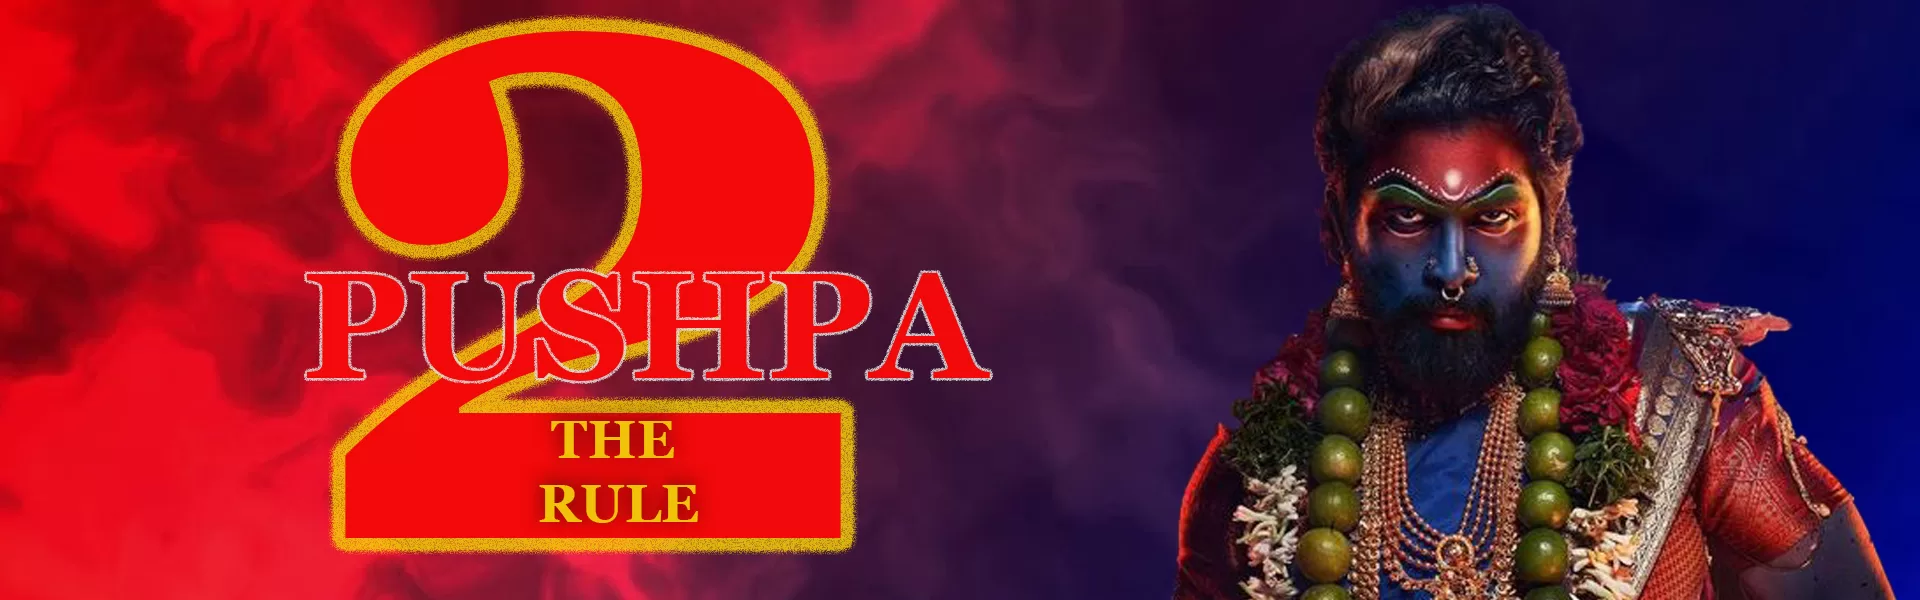 Pushpa 2: The Rule' release date announced!